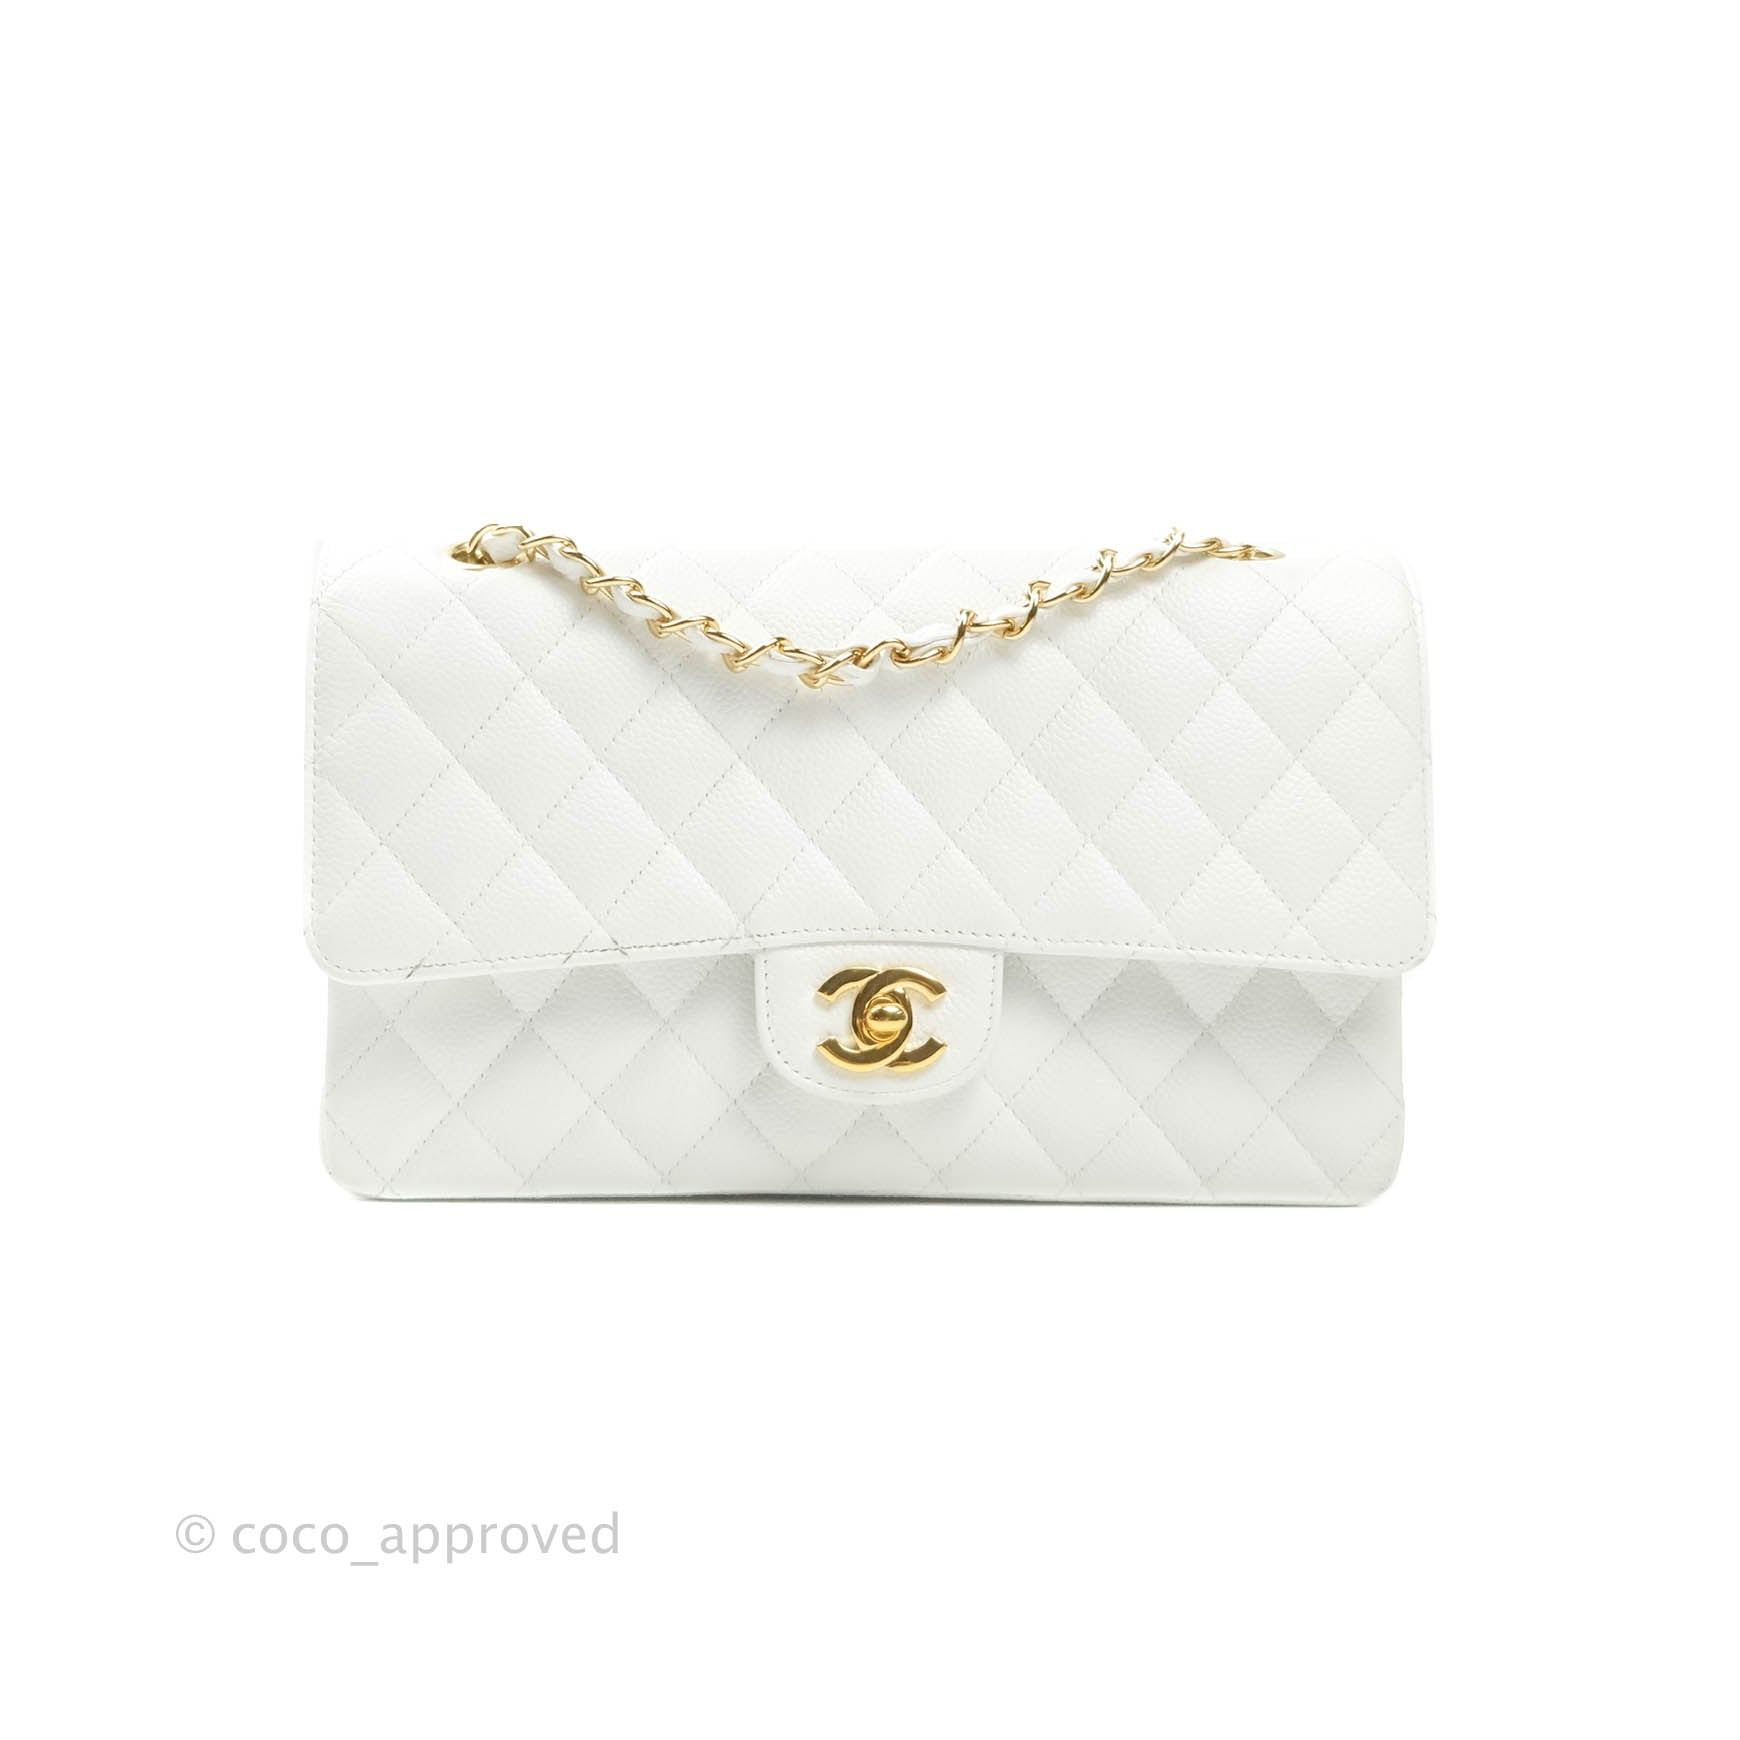 new white chanel bag authentic